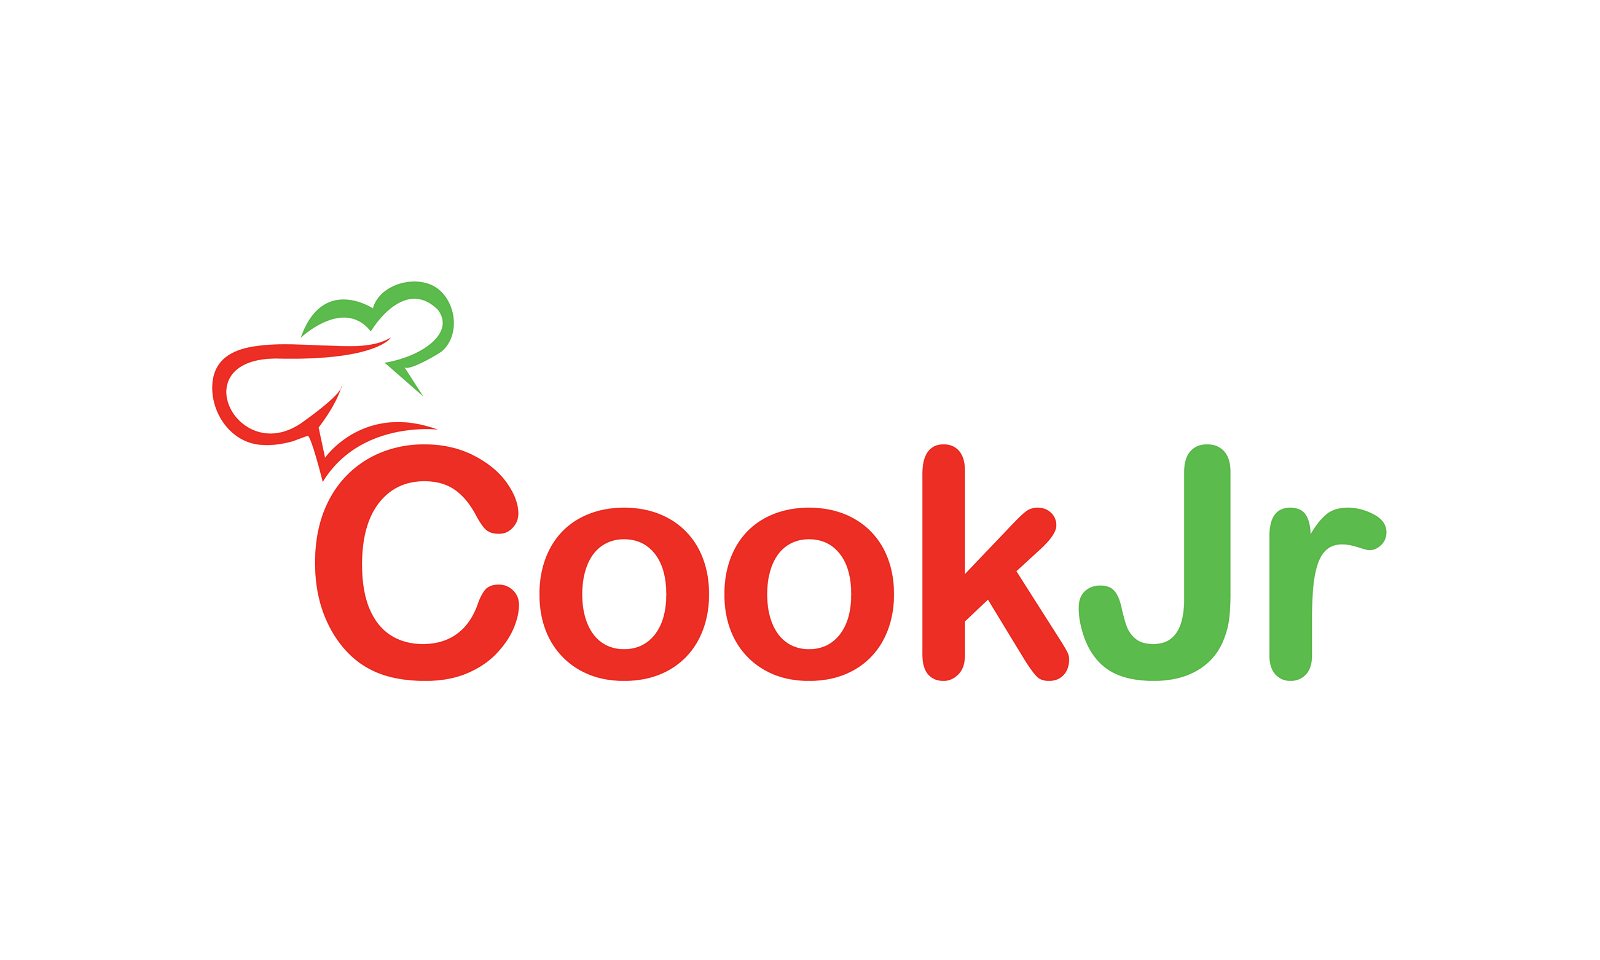 CookJr.com - Creative brandable domain for sale